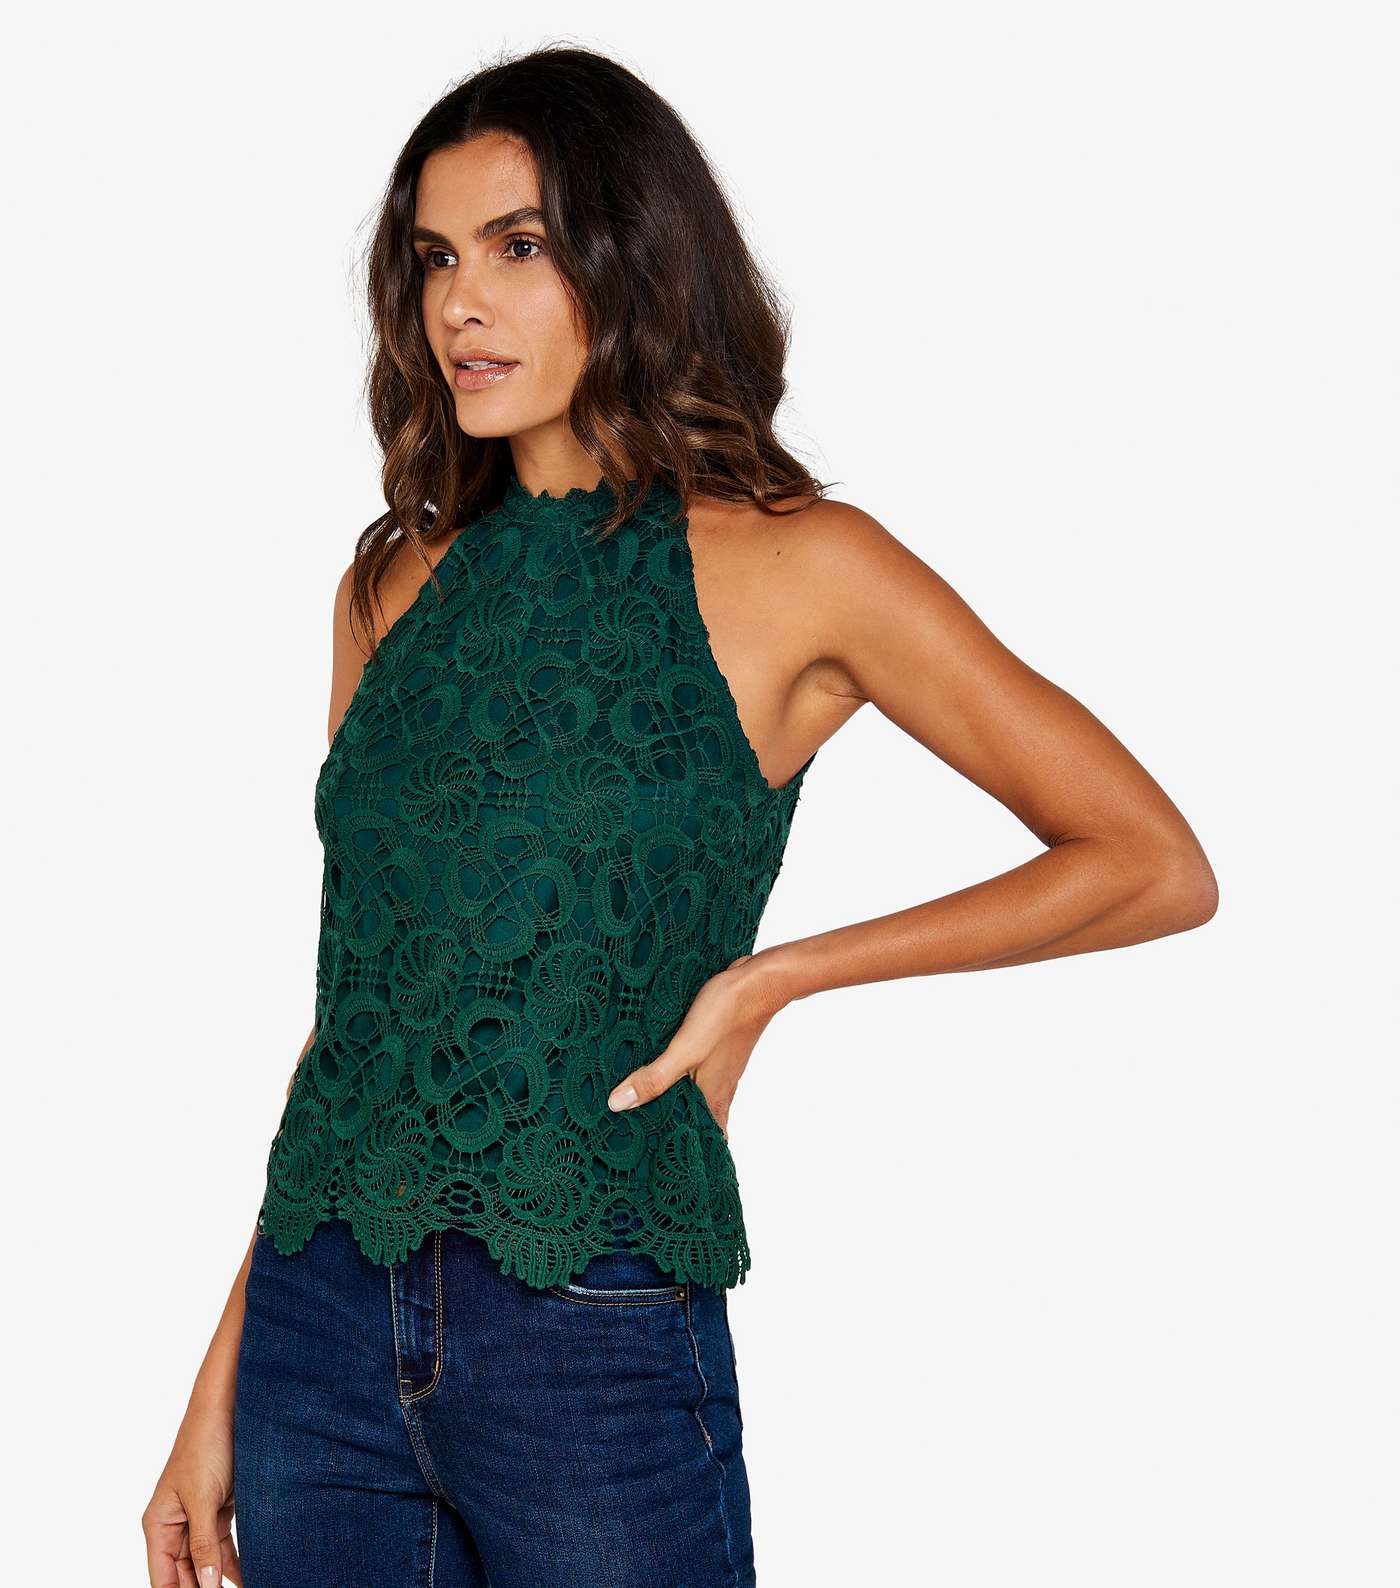 Apricot Dark Green Lace High Neck Sleeveless Top Image 2